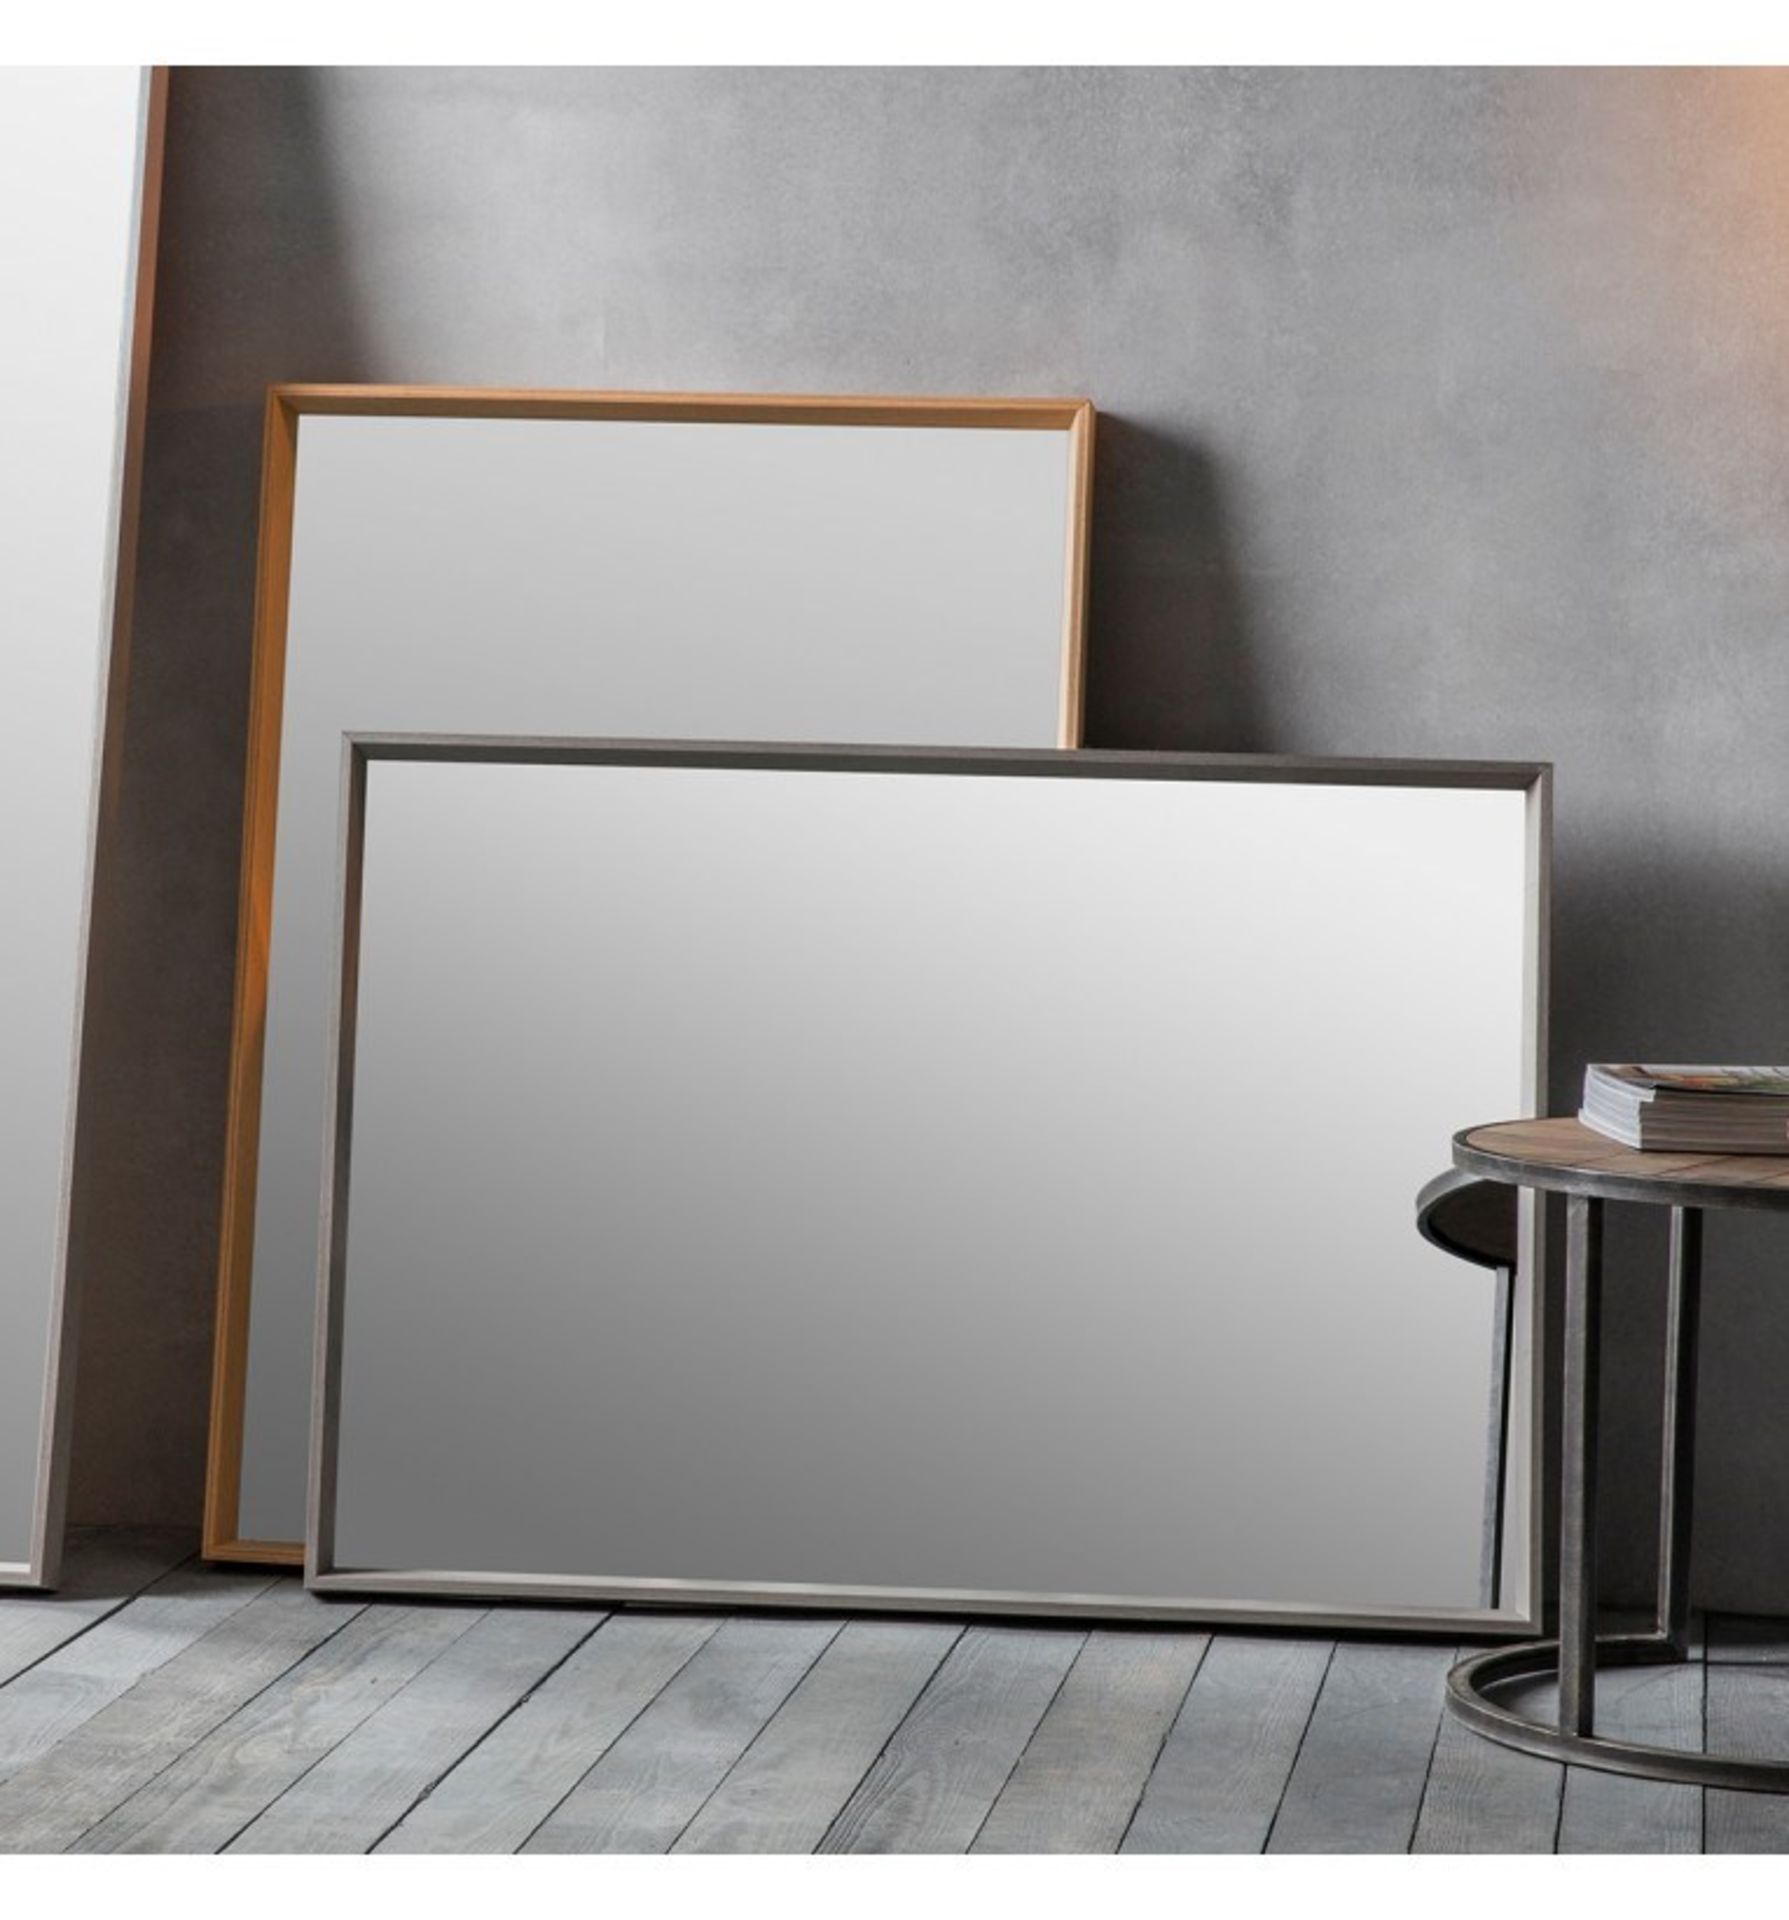 Comet Mirror Grey A modern collection of solid wood framed mirrors with subtle tones of oak veneer